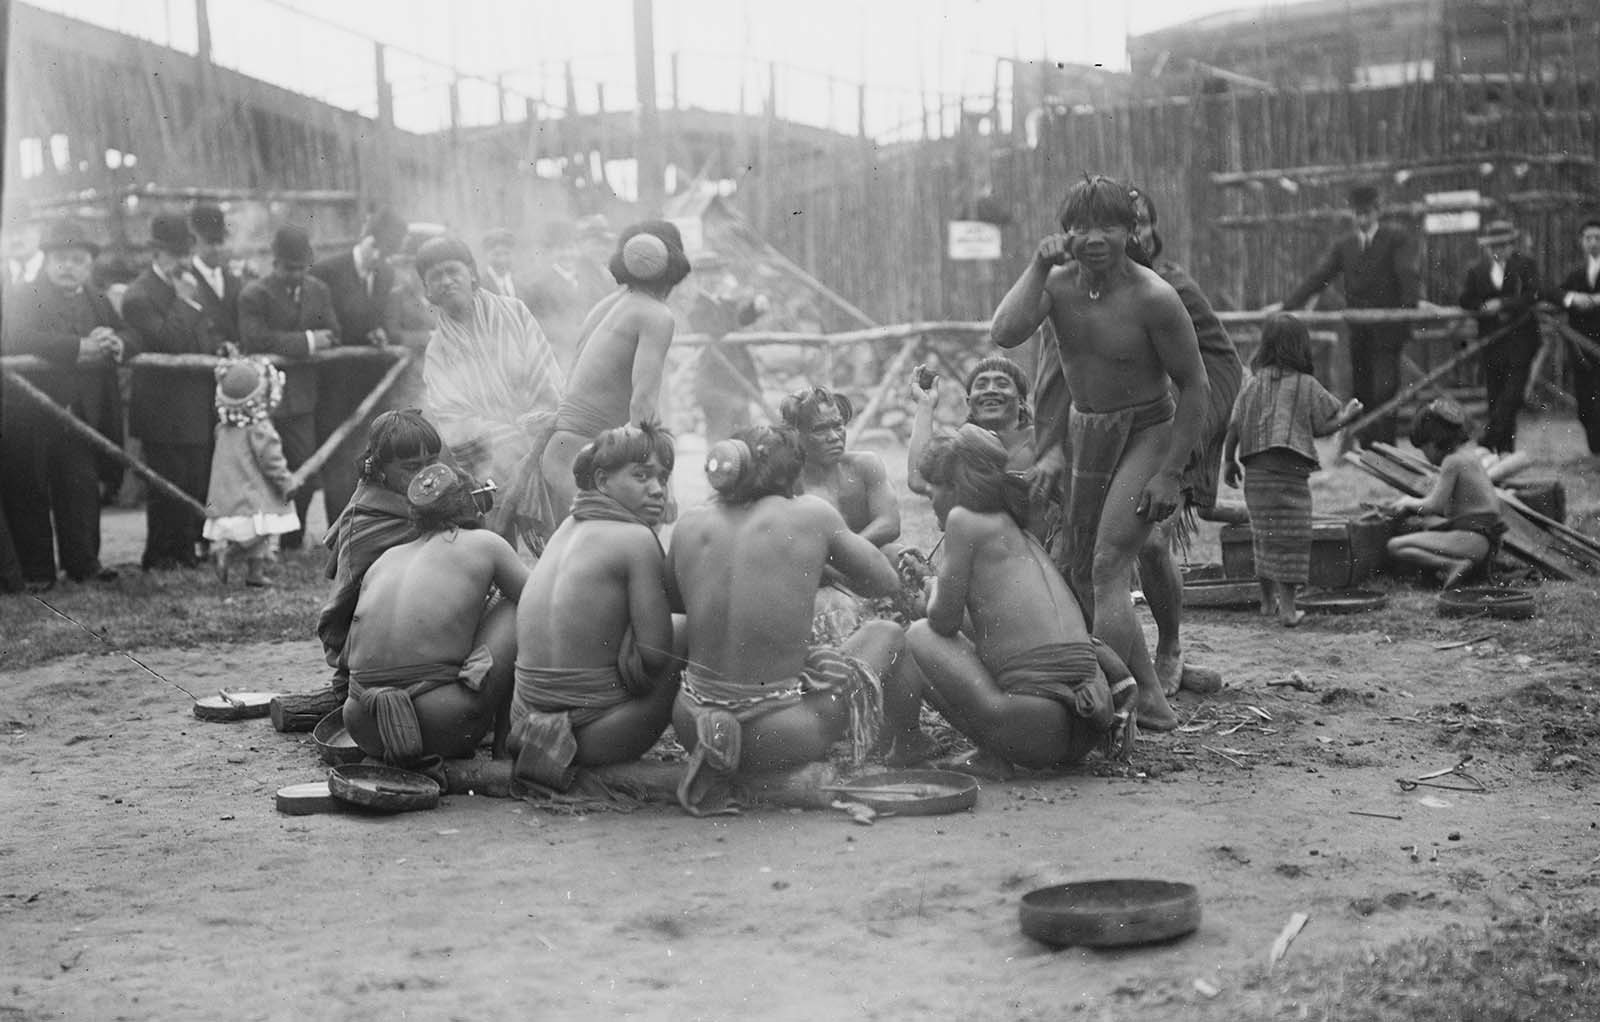 Filipinos in loin cloths sitting in a circle together at Coney Island in New York in the early 20th century while crowds of Americans watch on from behind barriers.